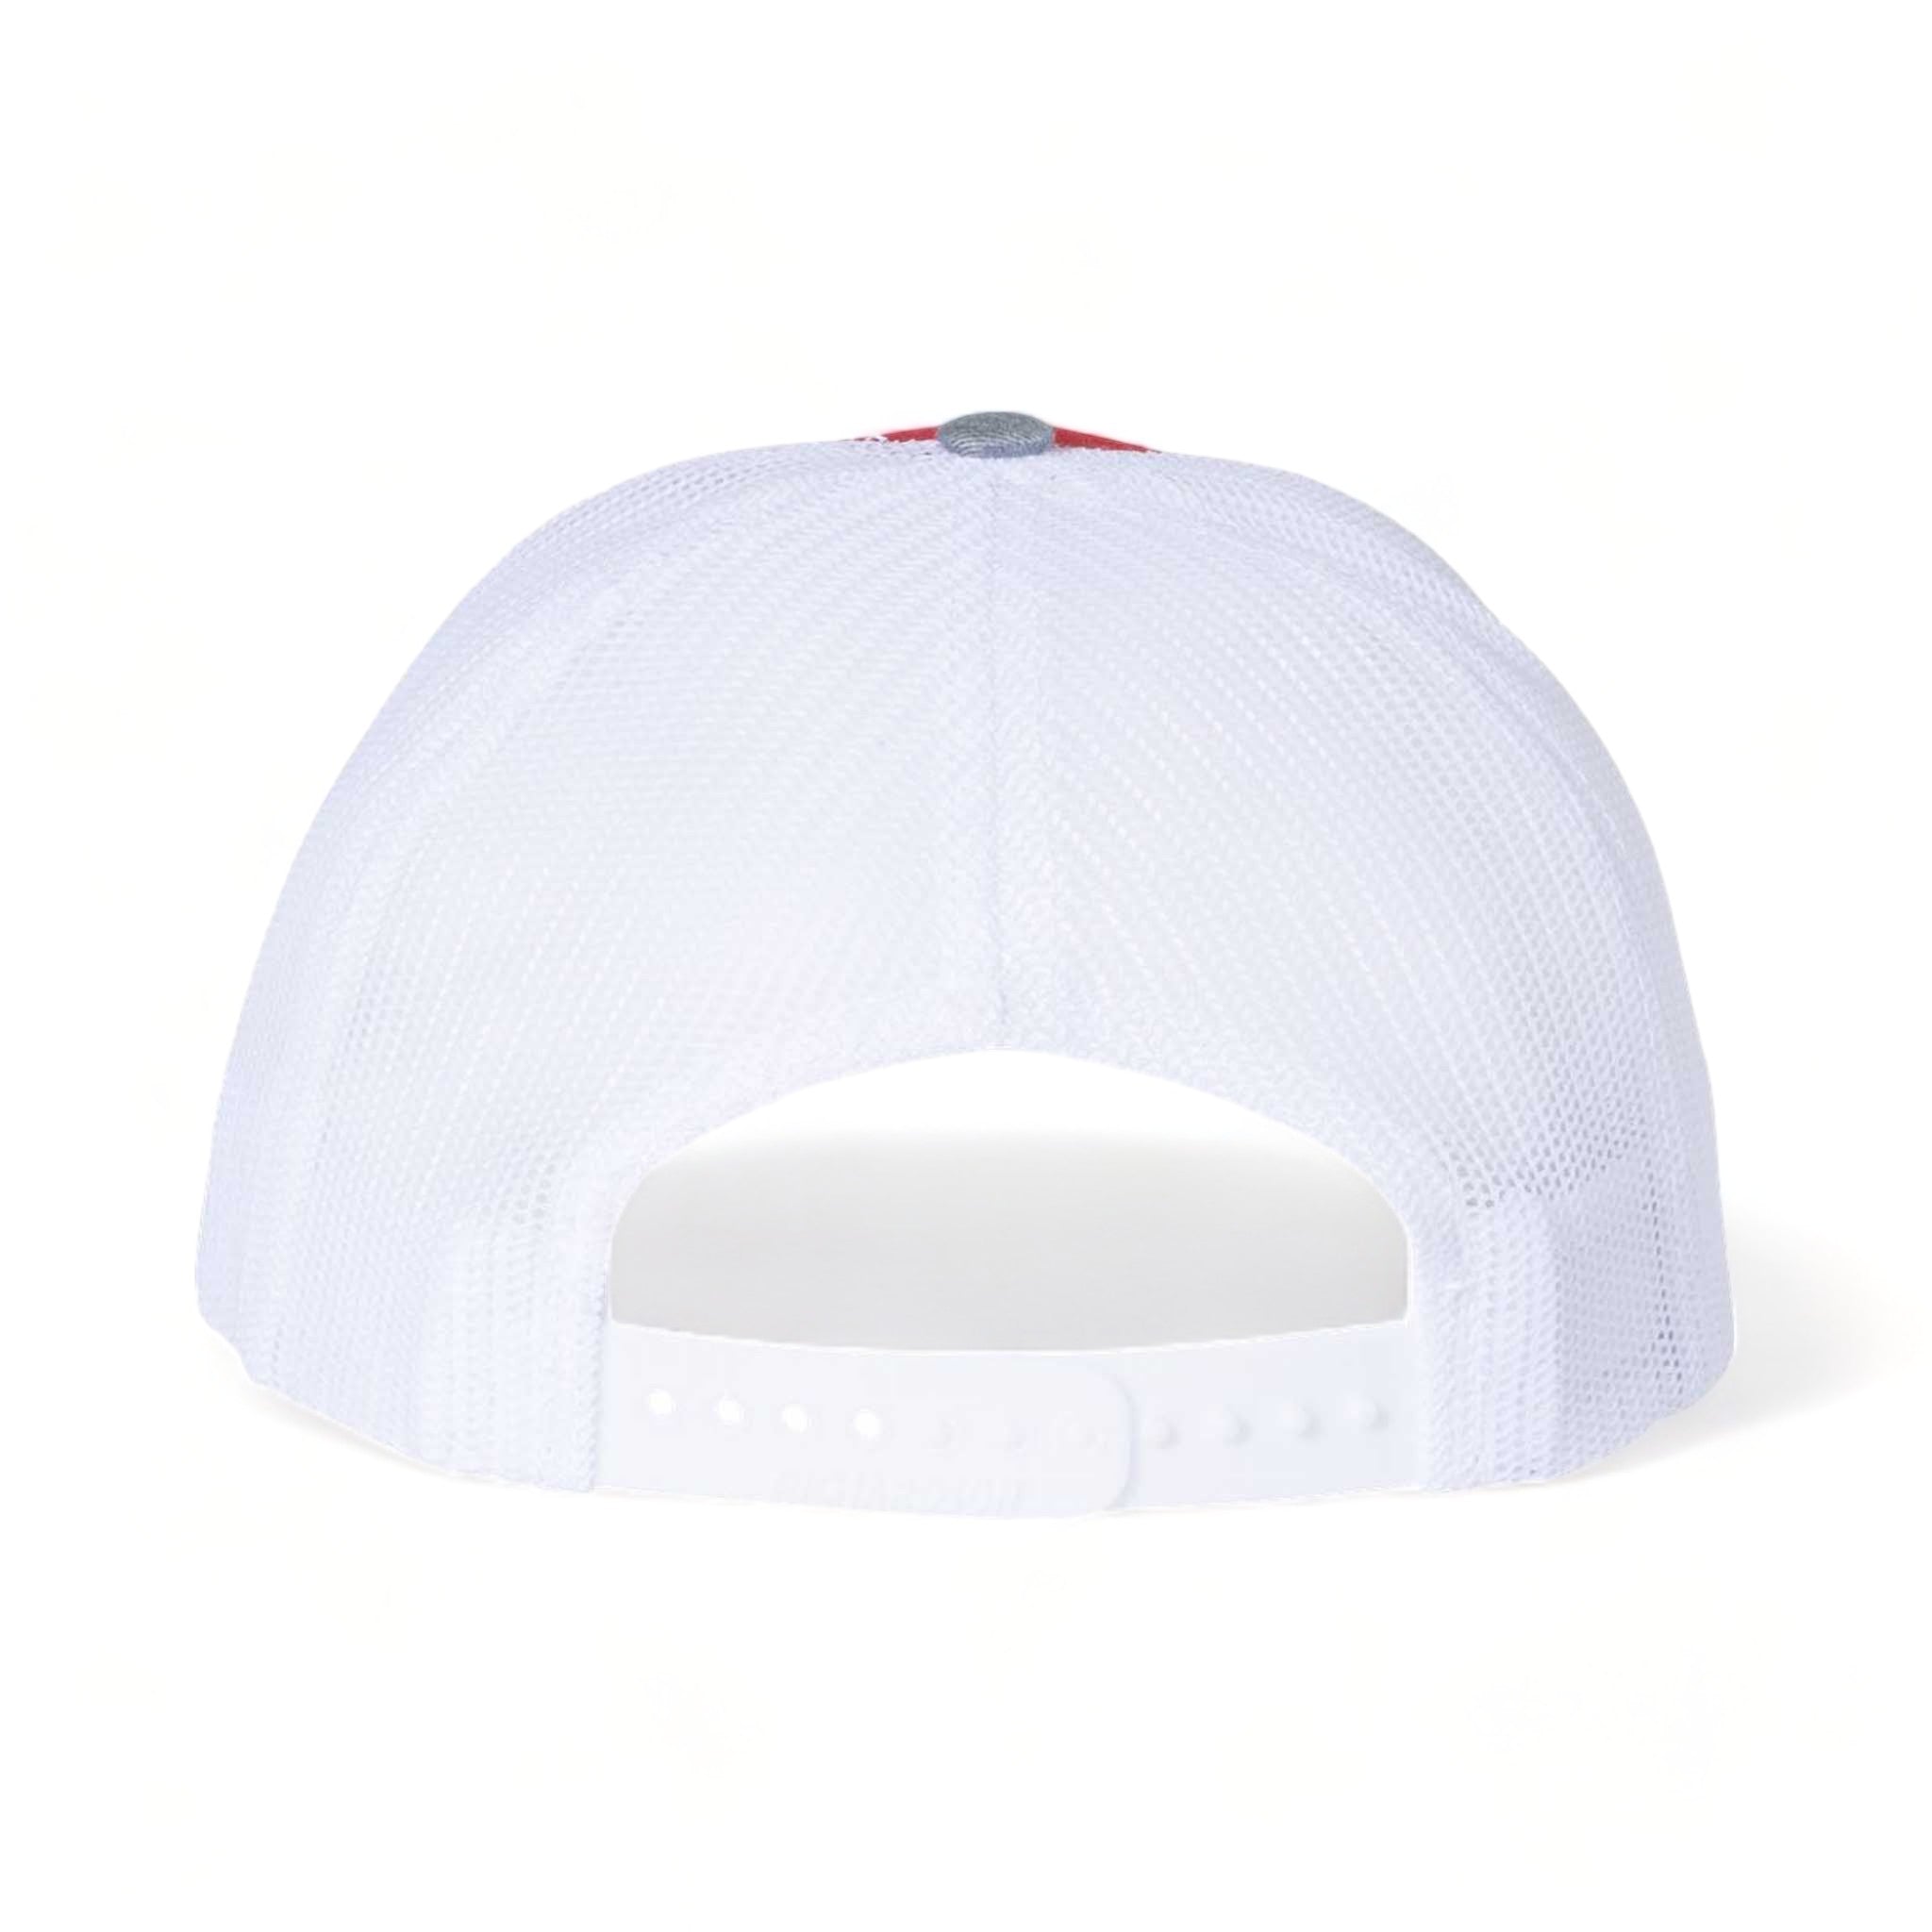 Back view of Richardson 112 custom hat in red, white and heather grey